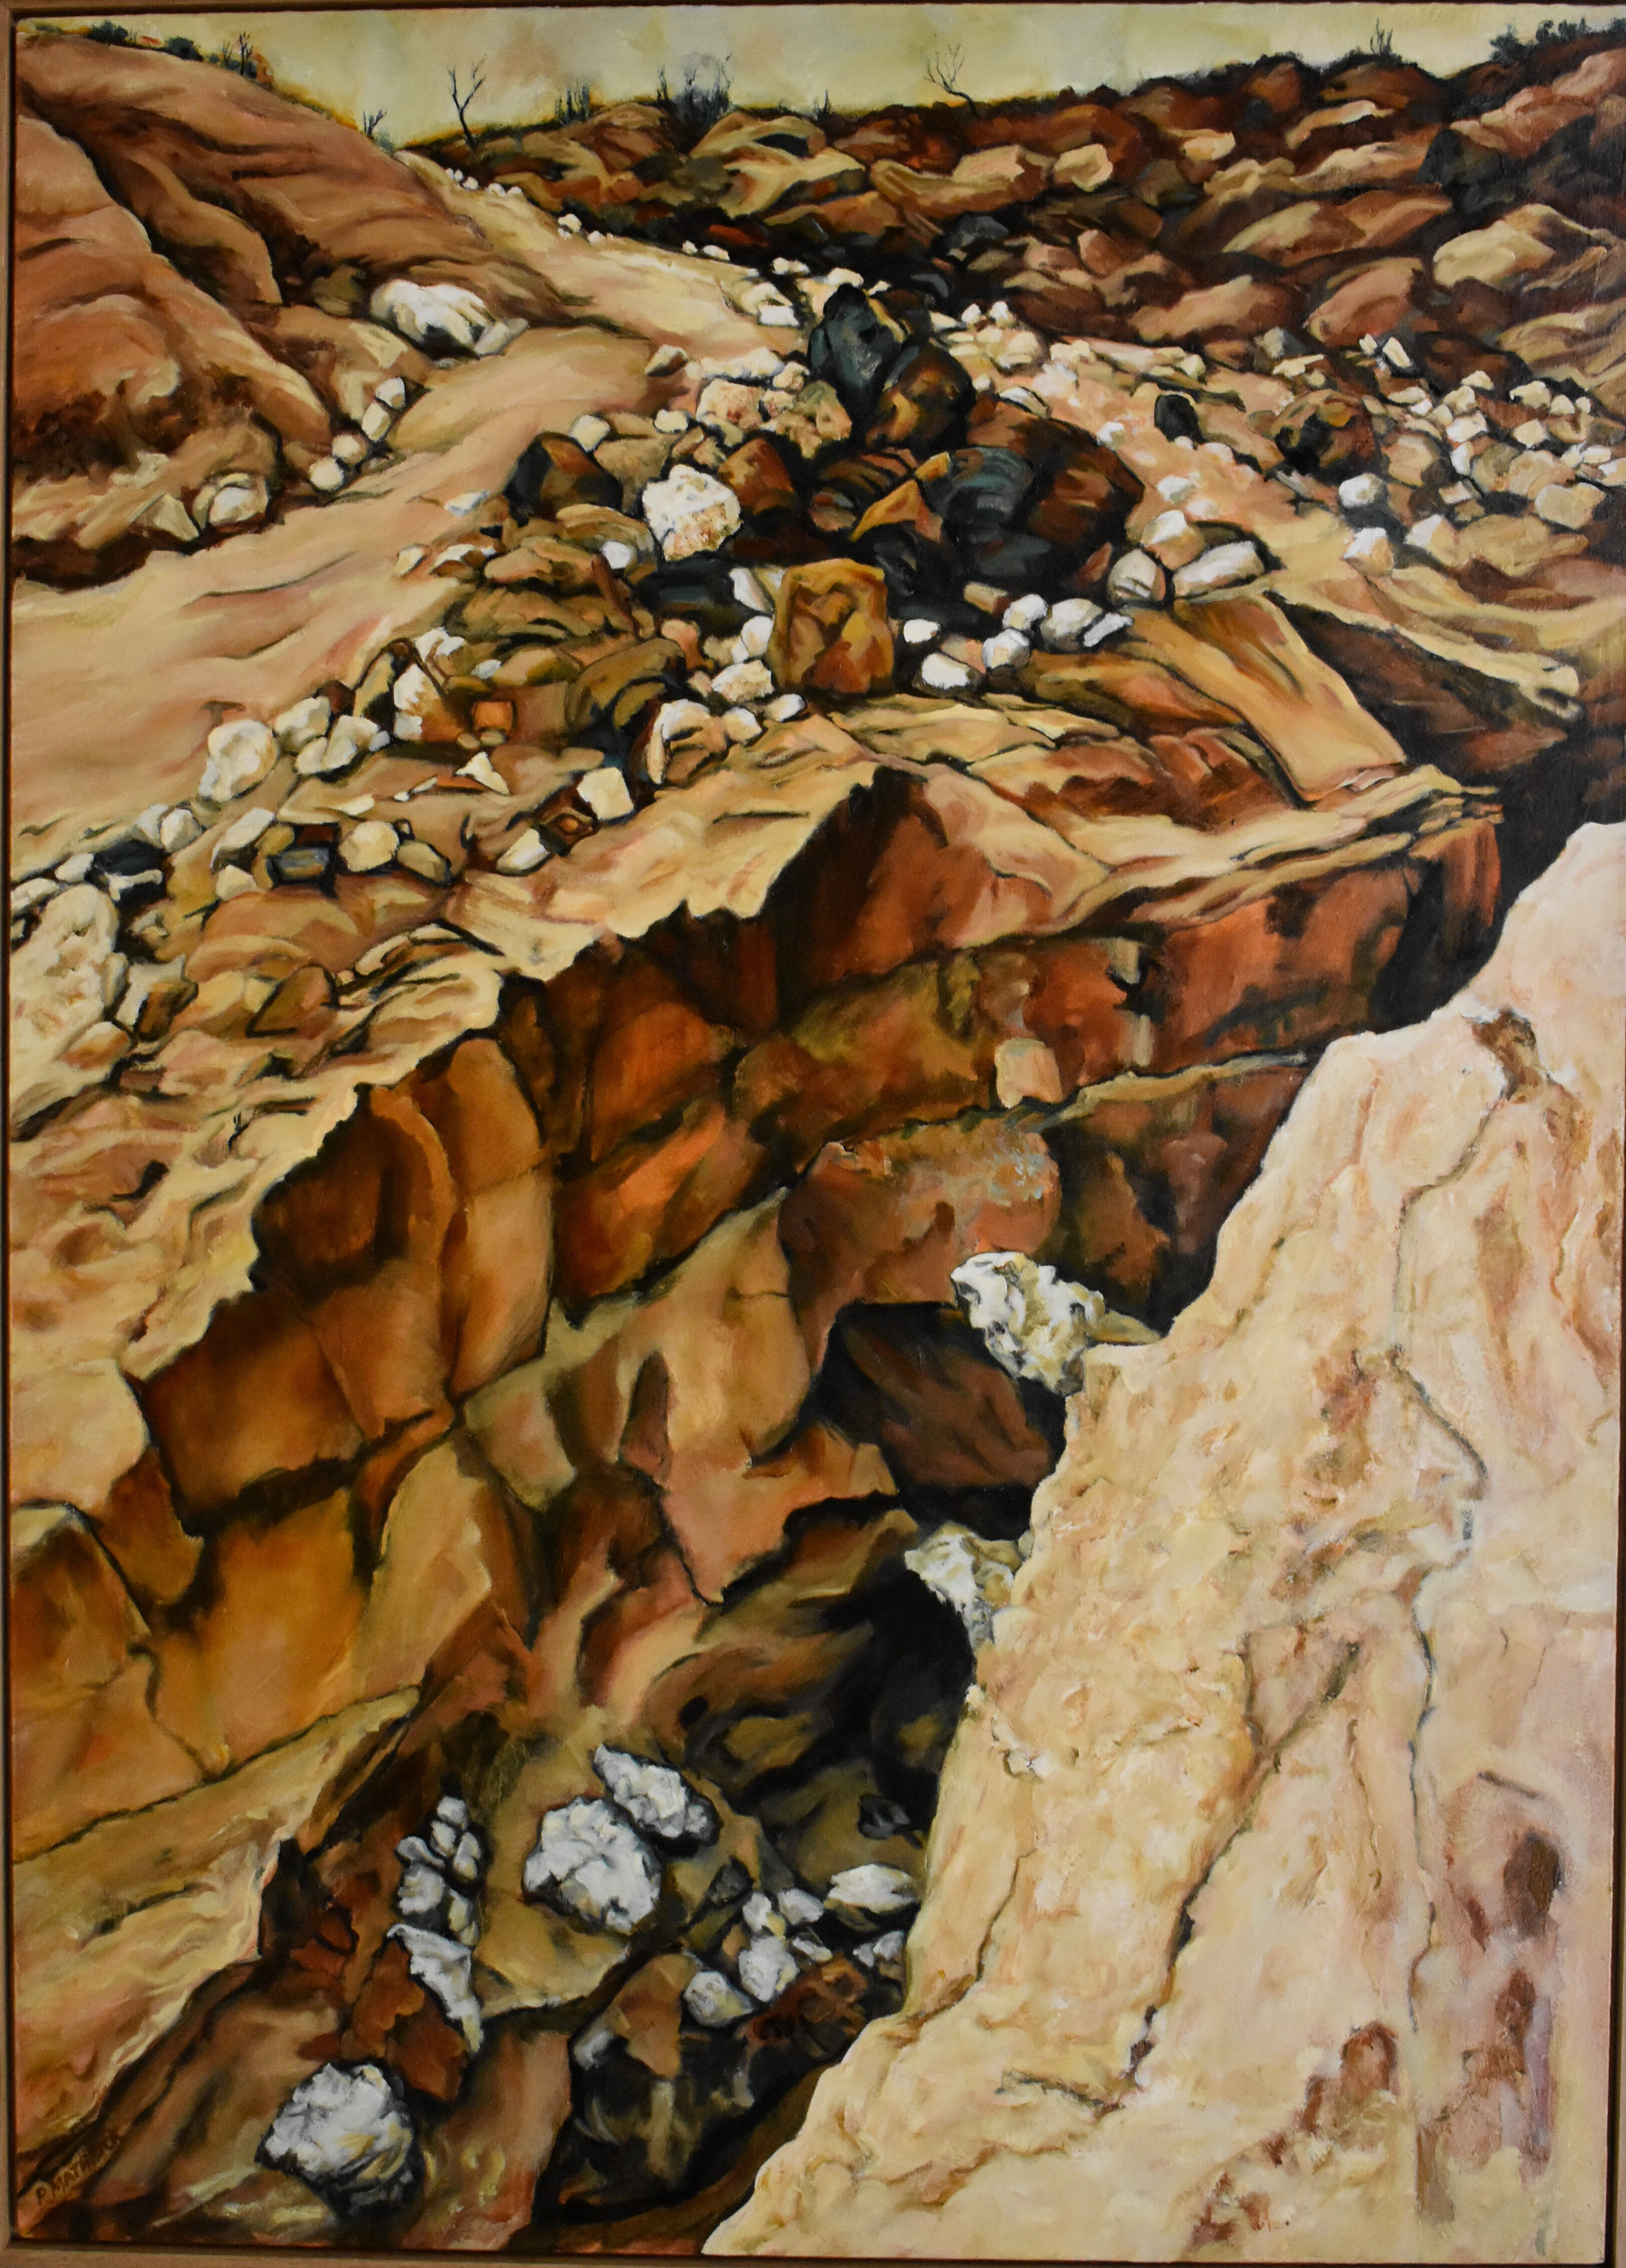 7. 'Fissure' oil on canvas 140cm x 100cm